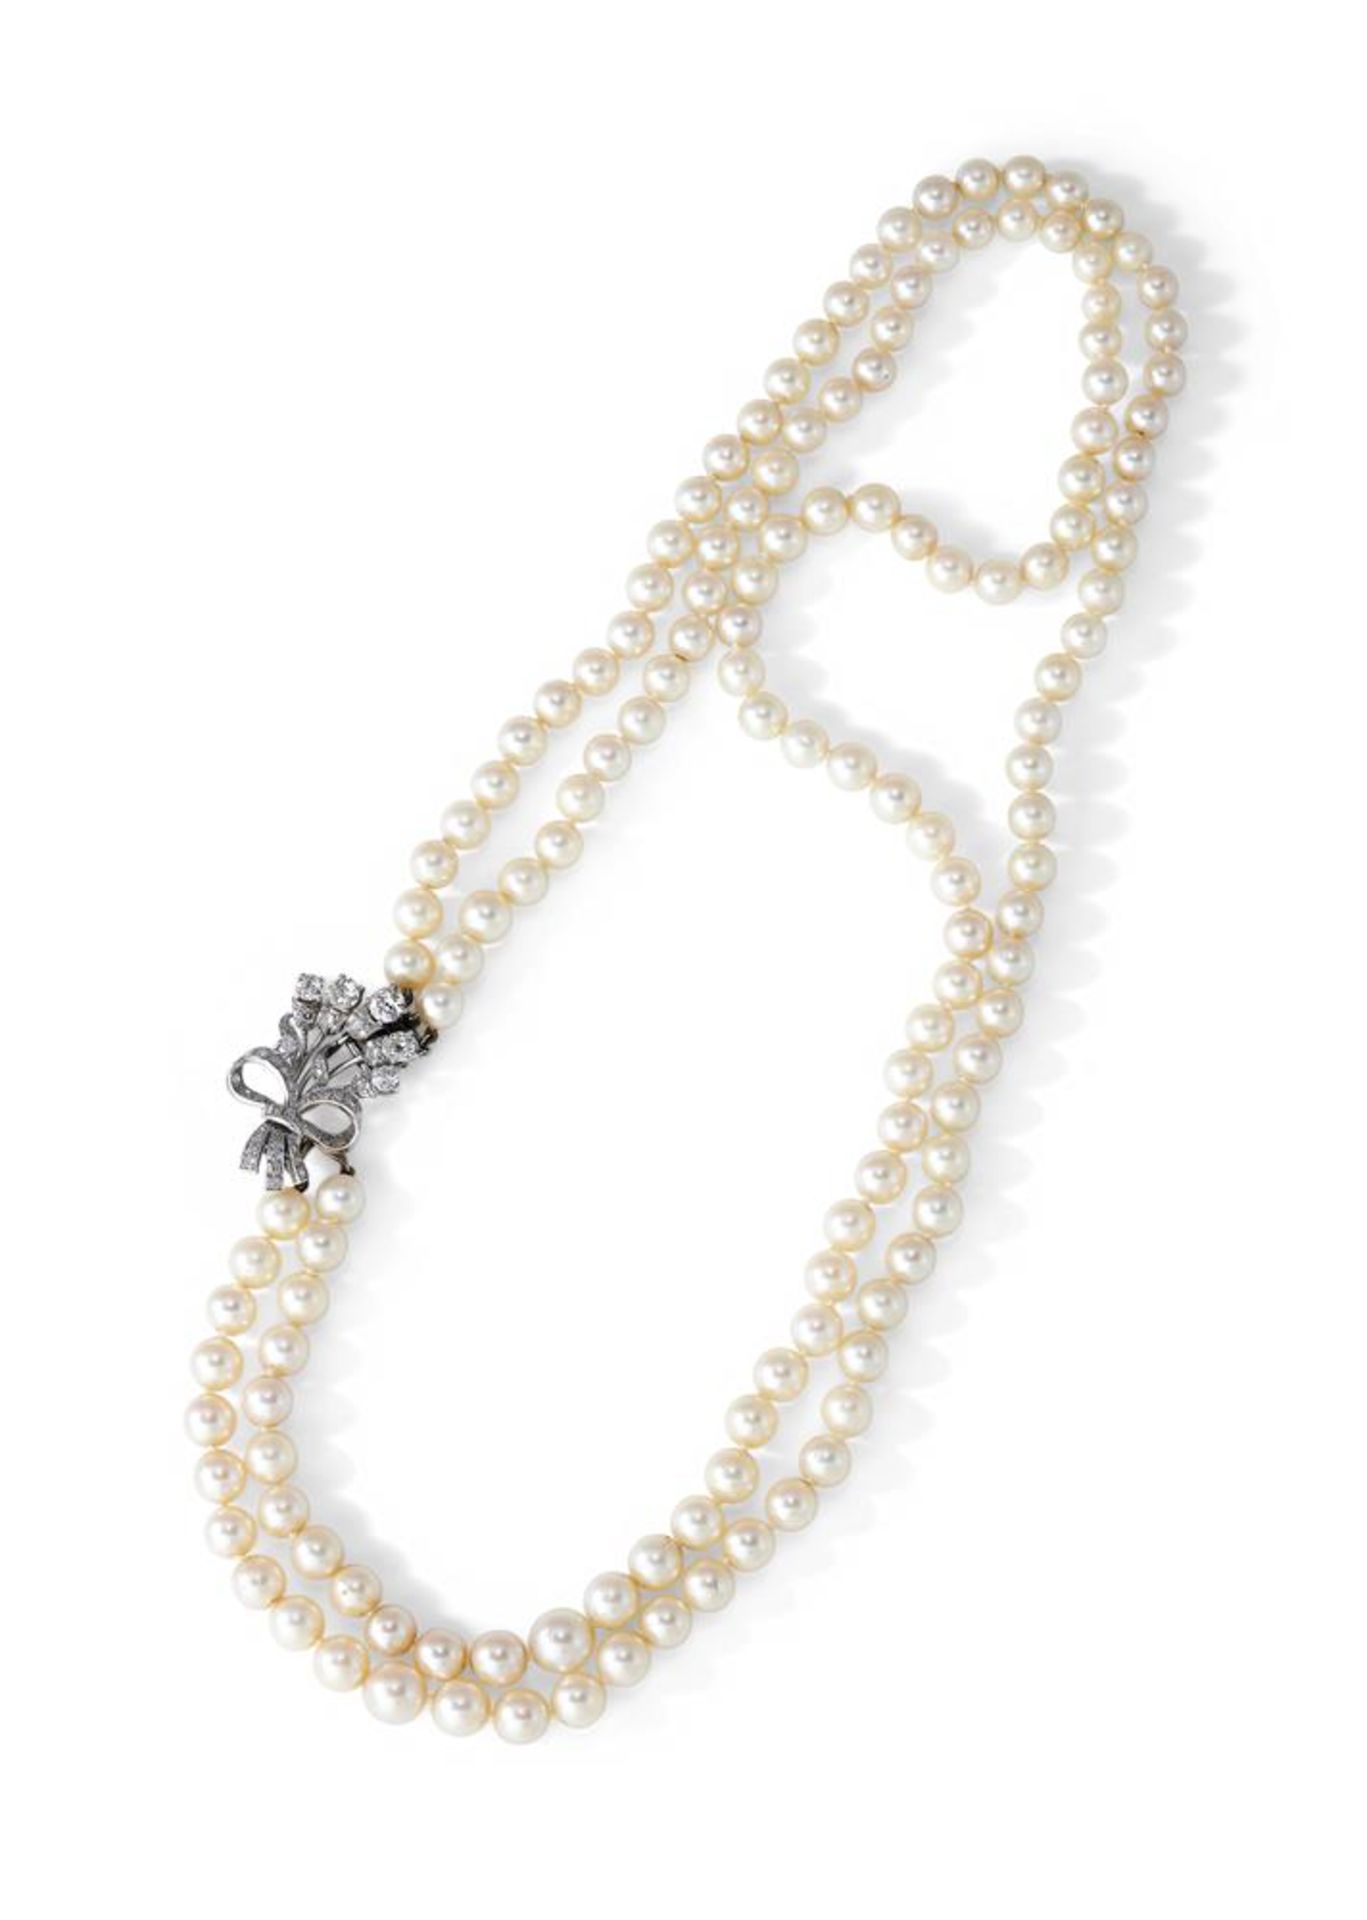 A TWO STRAND CULTURED PEARL AND DIAMOND NECKLACE